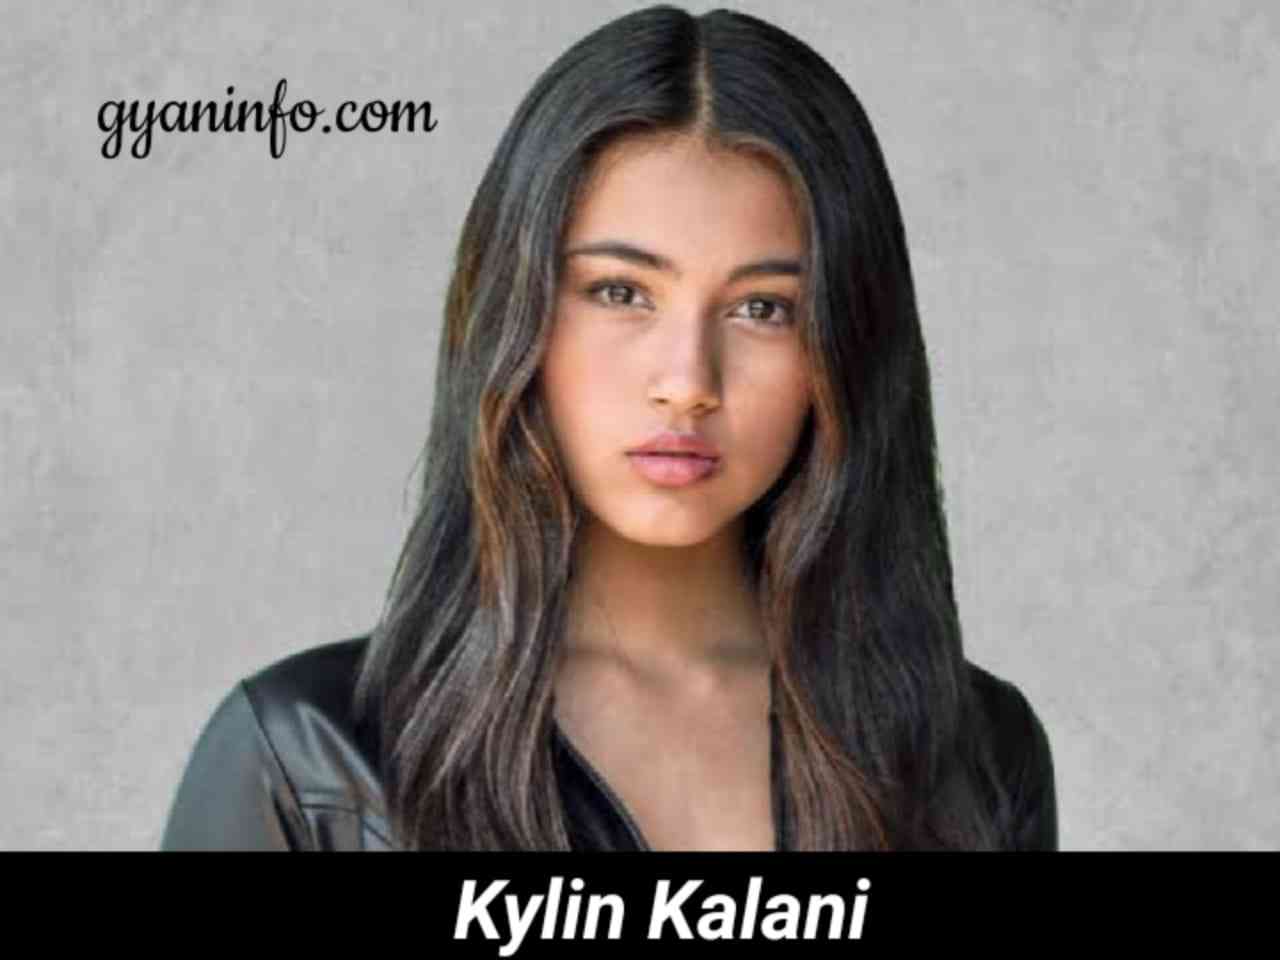 Kylin Kalani Biography, Height, Age, Weight, Body Measurements, Boyfriend, Family, Parents, Net Worth, Wiki & More